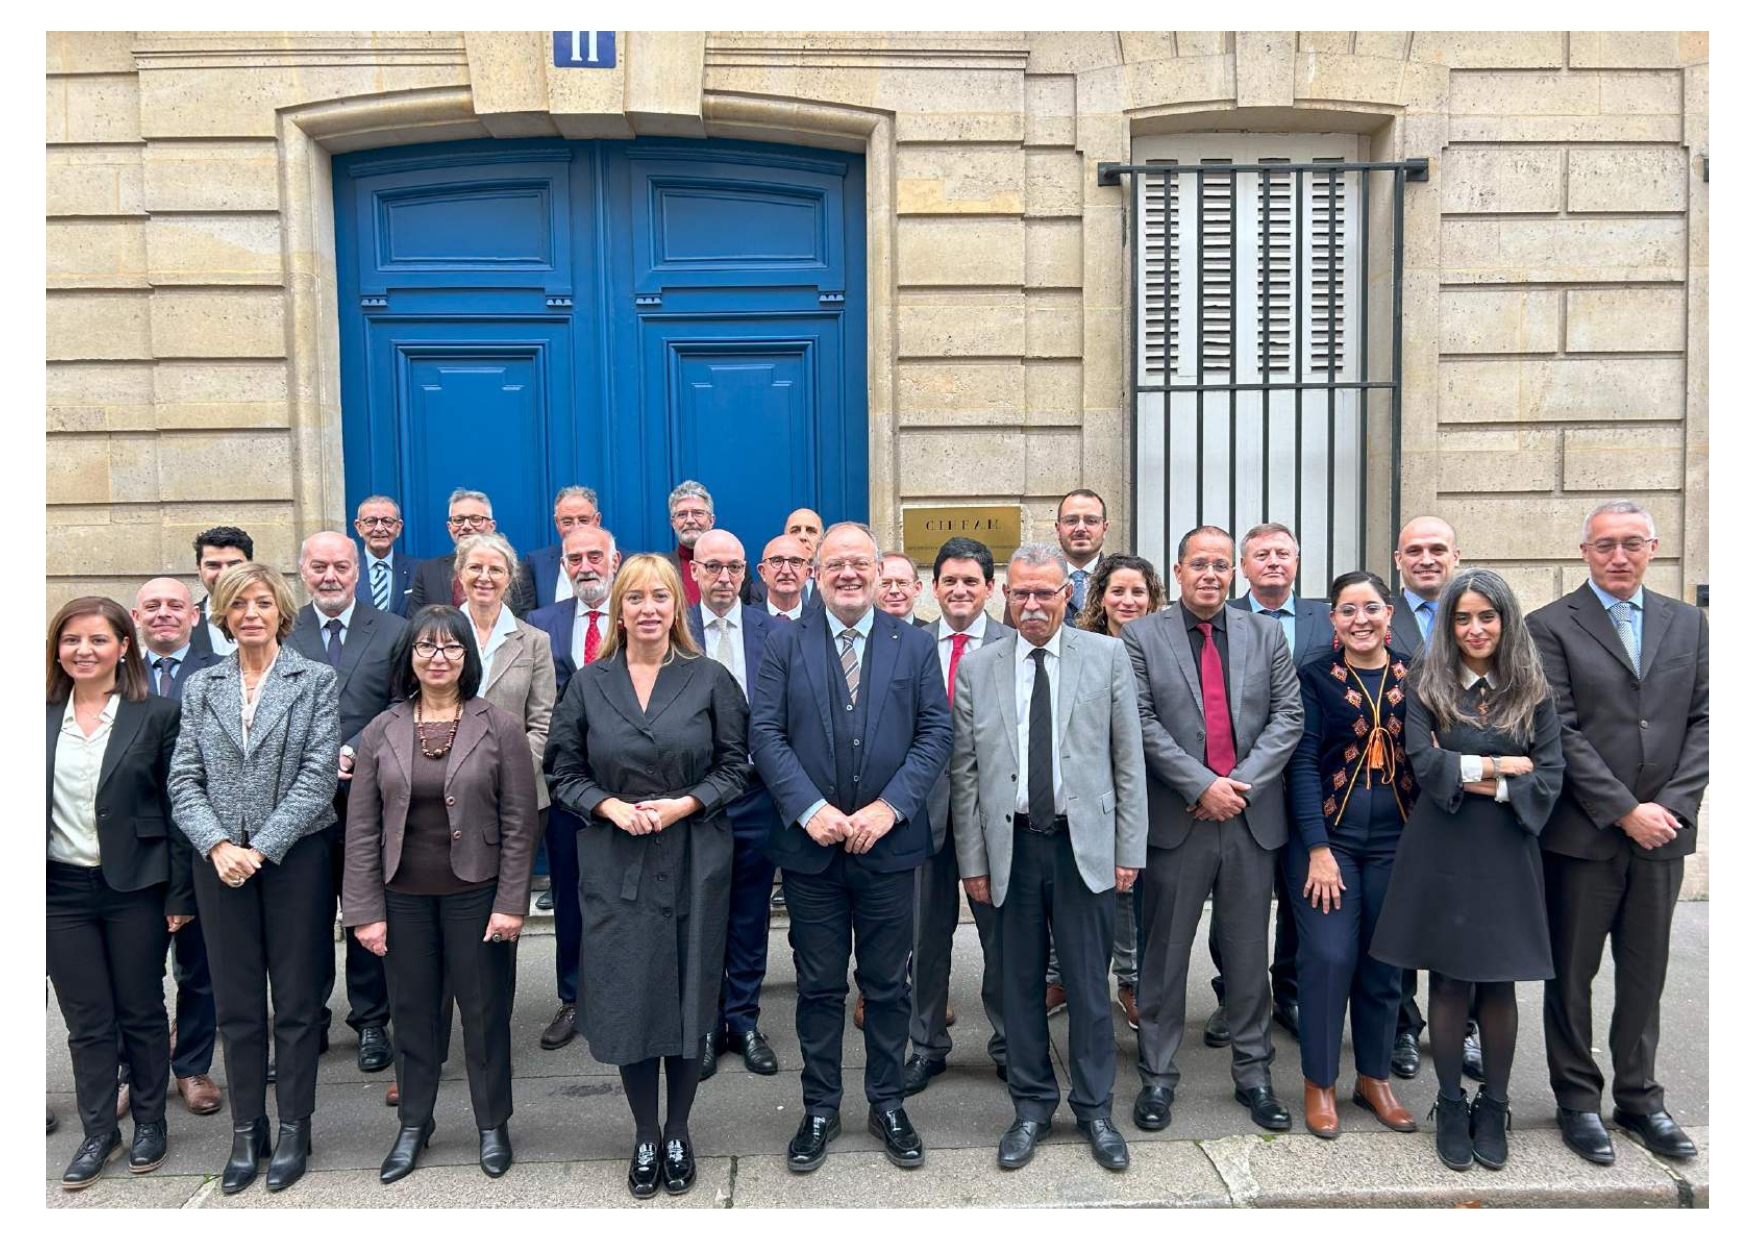 THE CIHEAM Governing BOARD MEETS IN PARIS